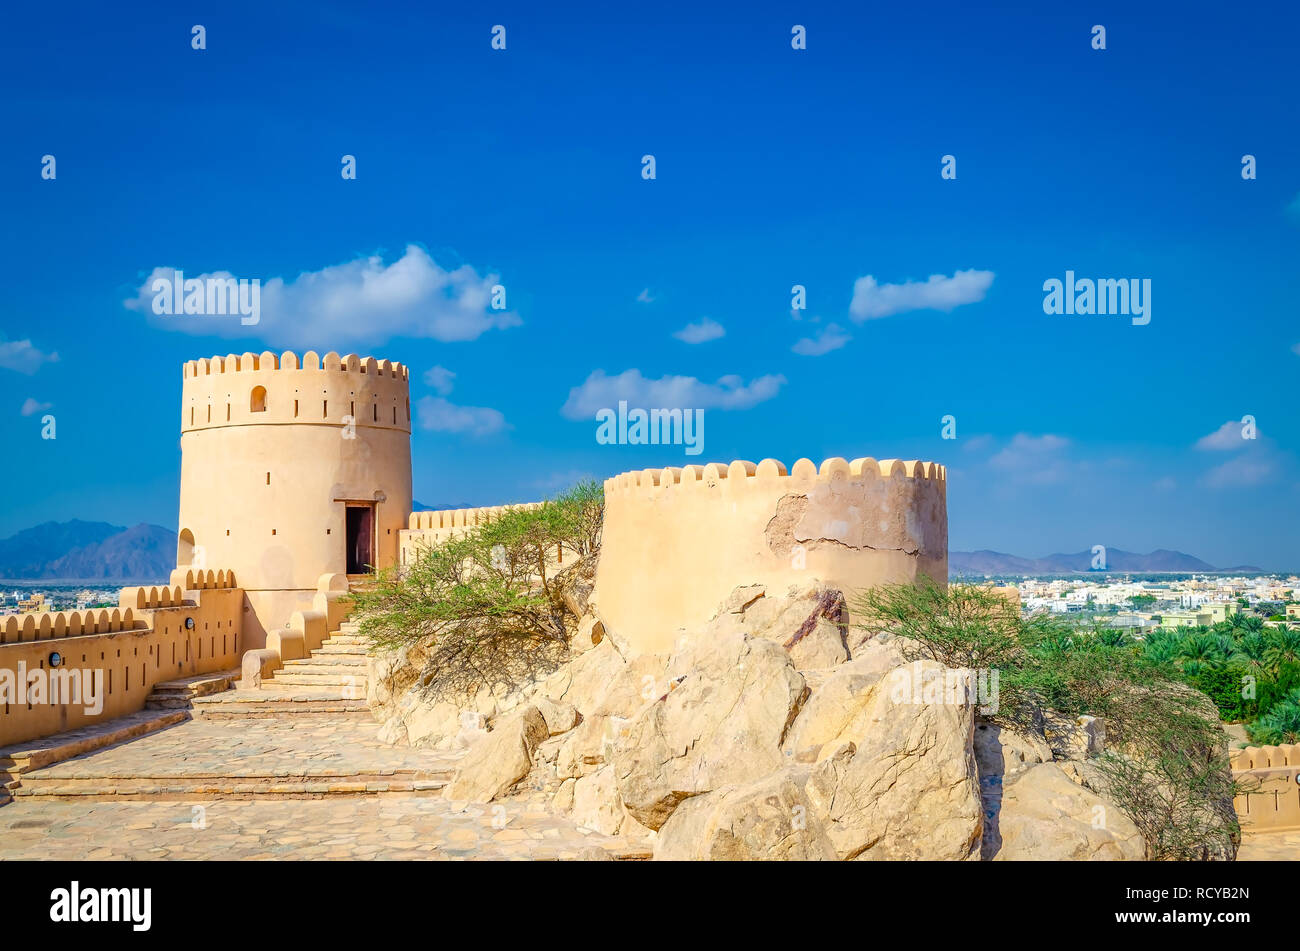 Turret of old, abandoned fort in Nakhal, Muscat, Oman on a clear and bright sunny day. Blue sky with minimal clouds and a desert oasis in the backgrou Stock Photo